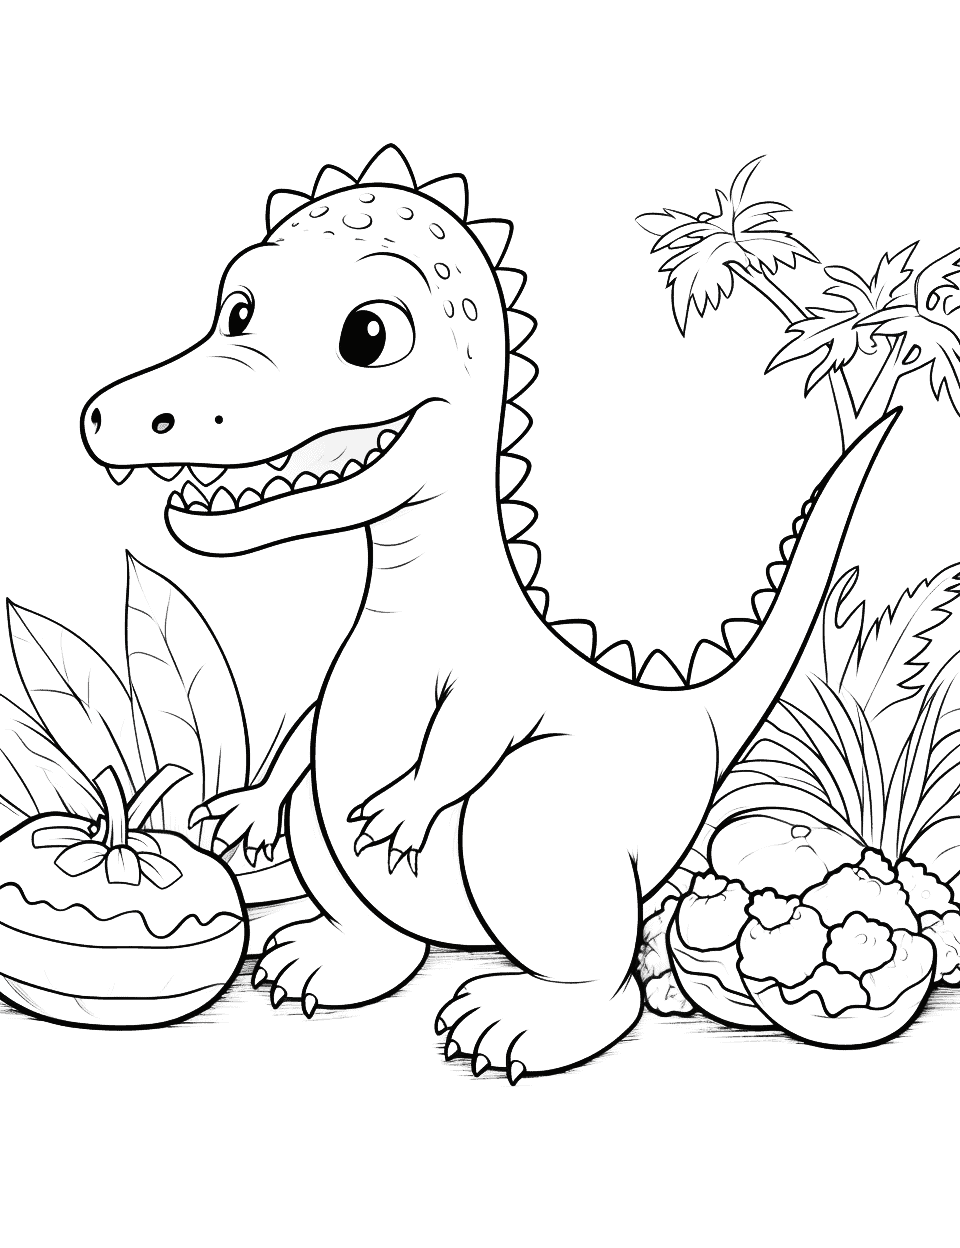 Cute Dino Picnic Dinosaur Coloring Page - Cute dinosaur having a picnic, complete with prehistoric fruits.